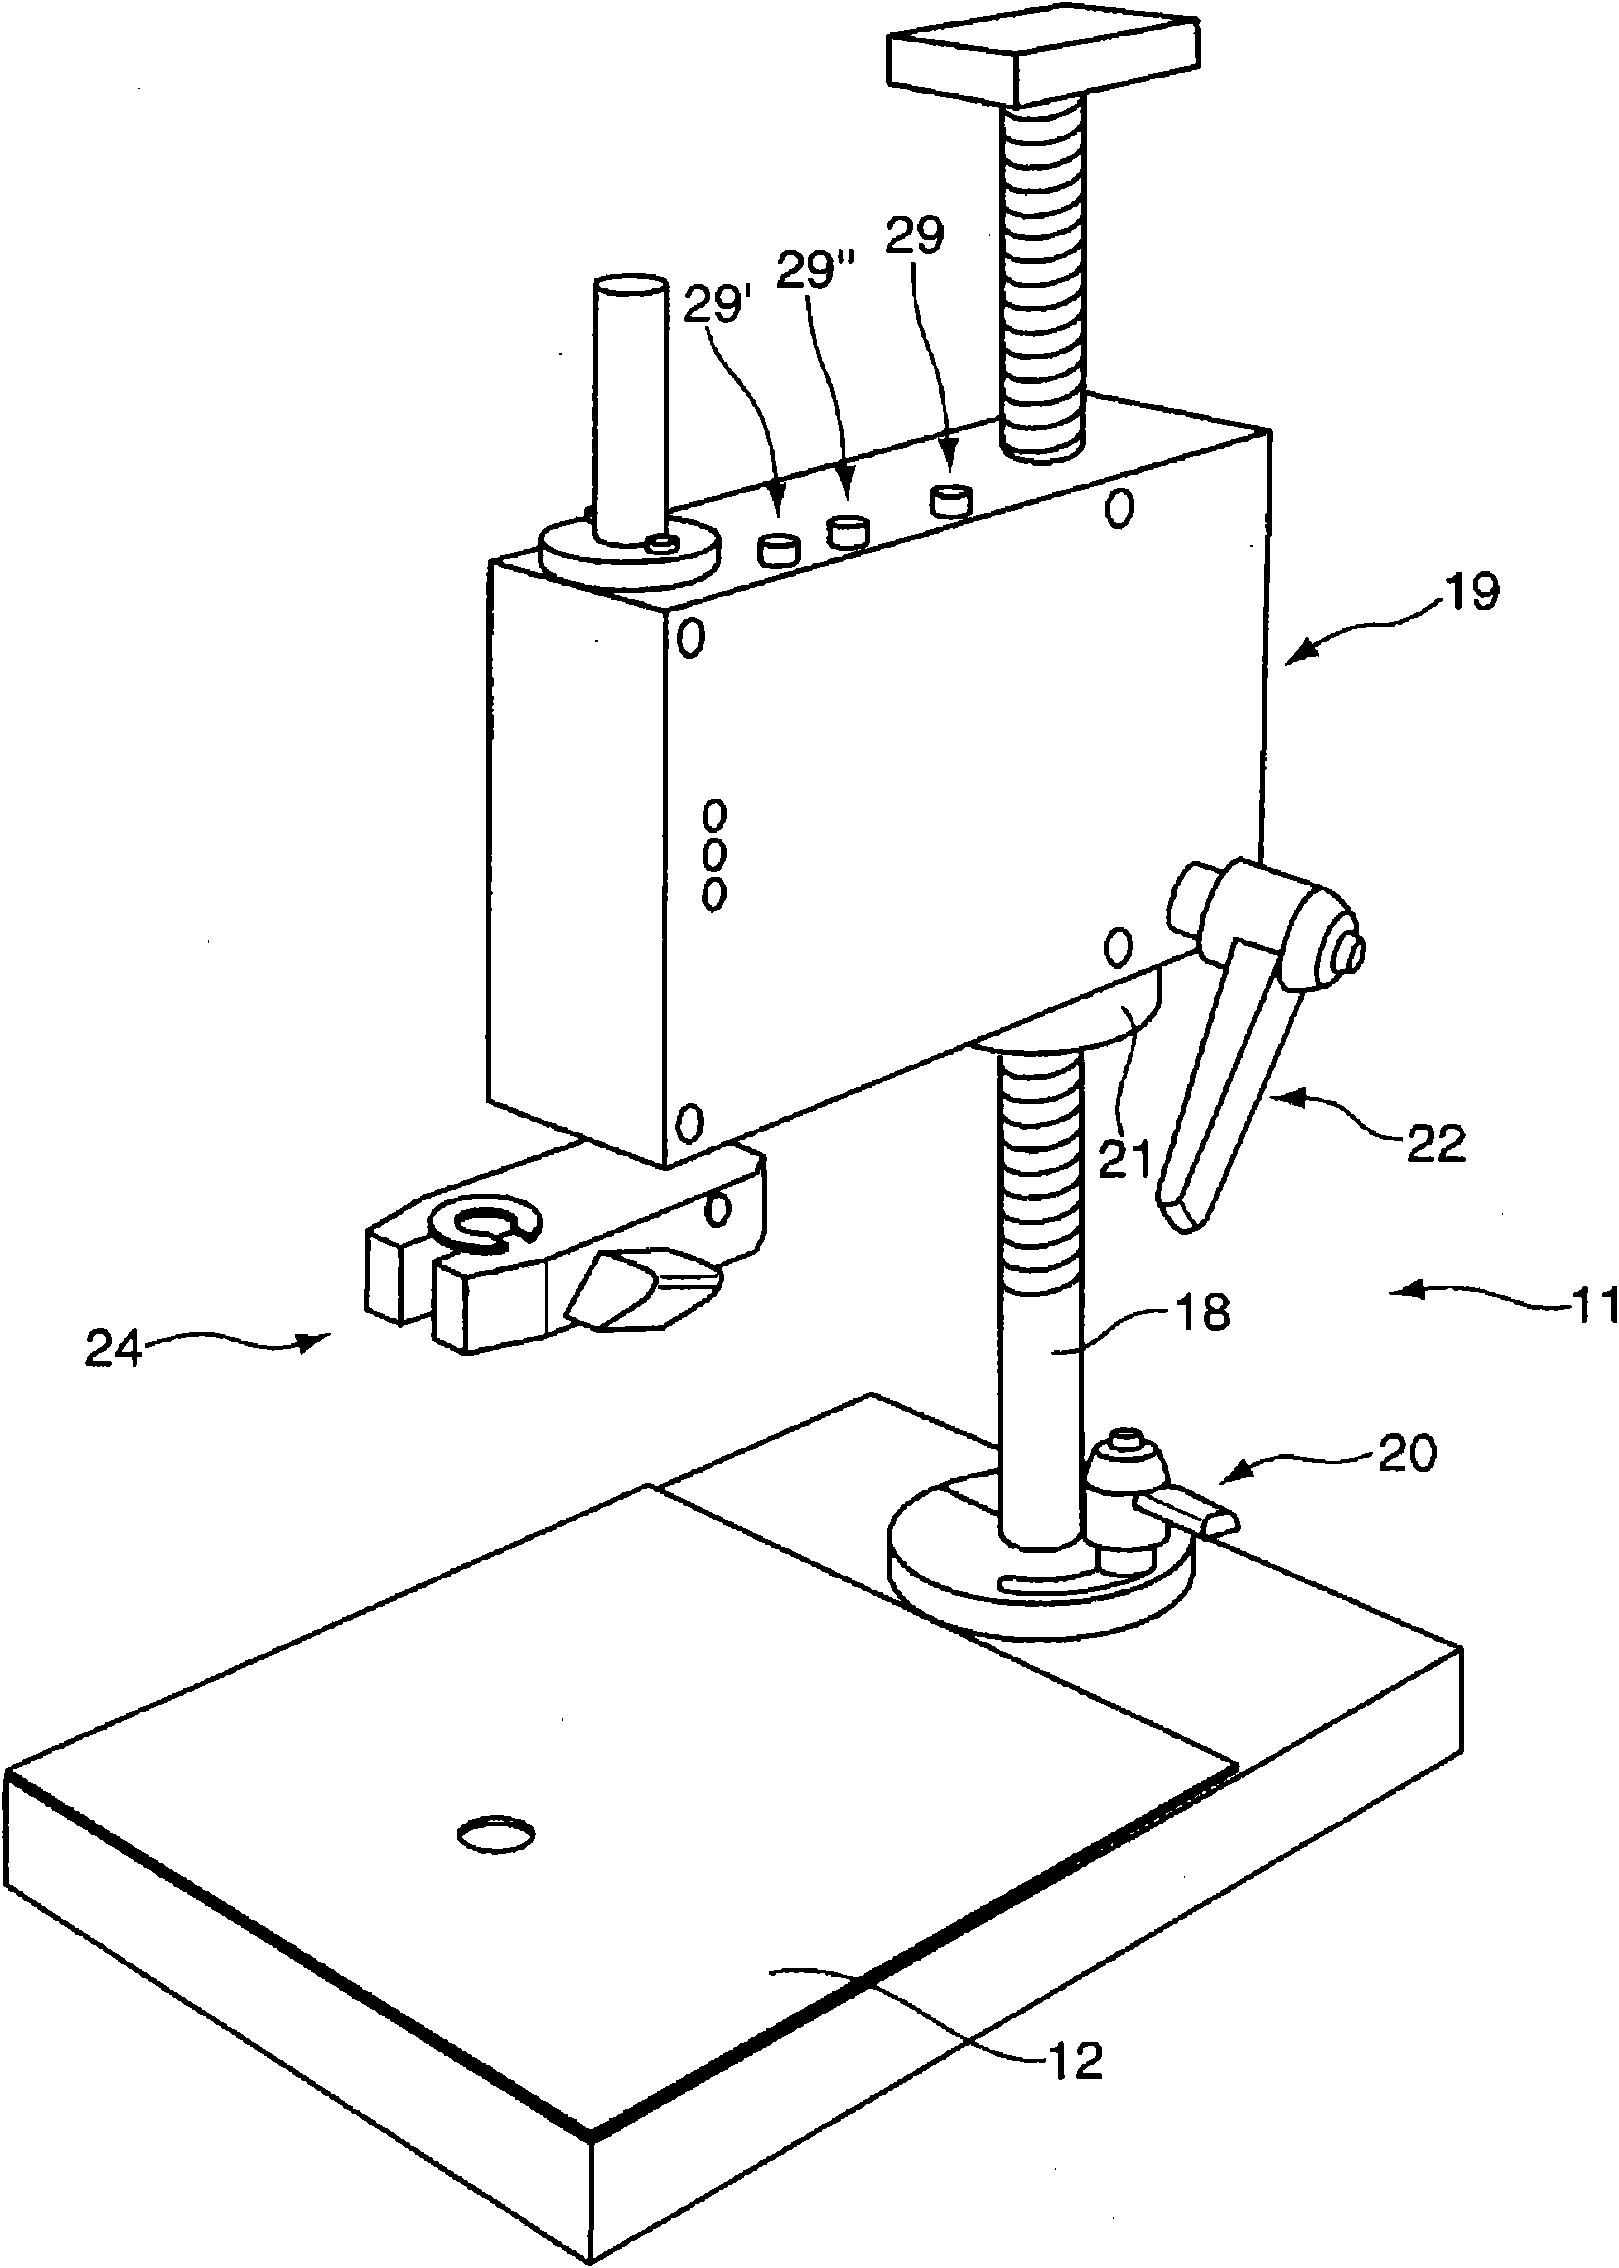 Measurement stand and method of its electrical control